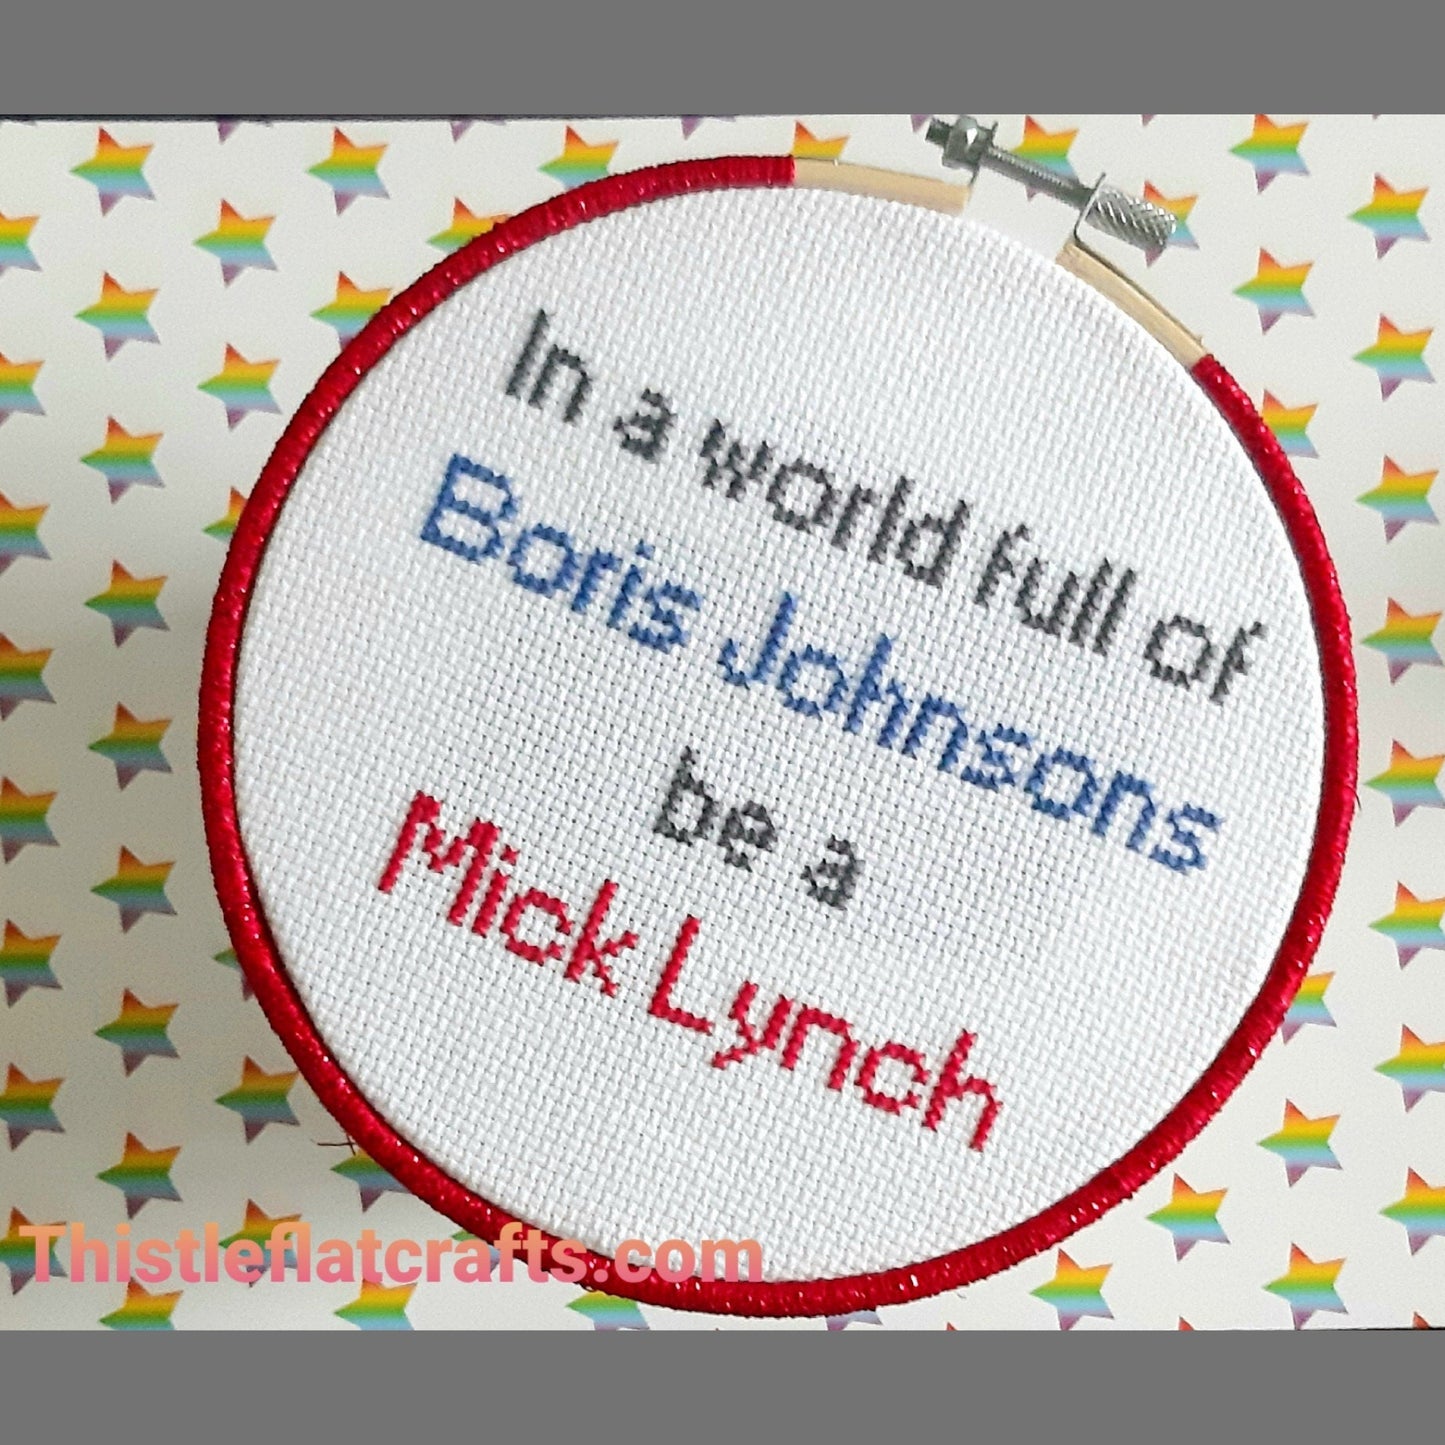 In a world full of Boris Johnsons, be a Mick Lynch, completed cross stitch quote - Thistleflat Crafts